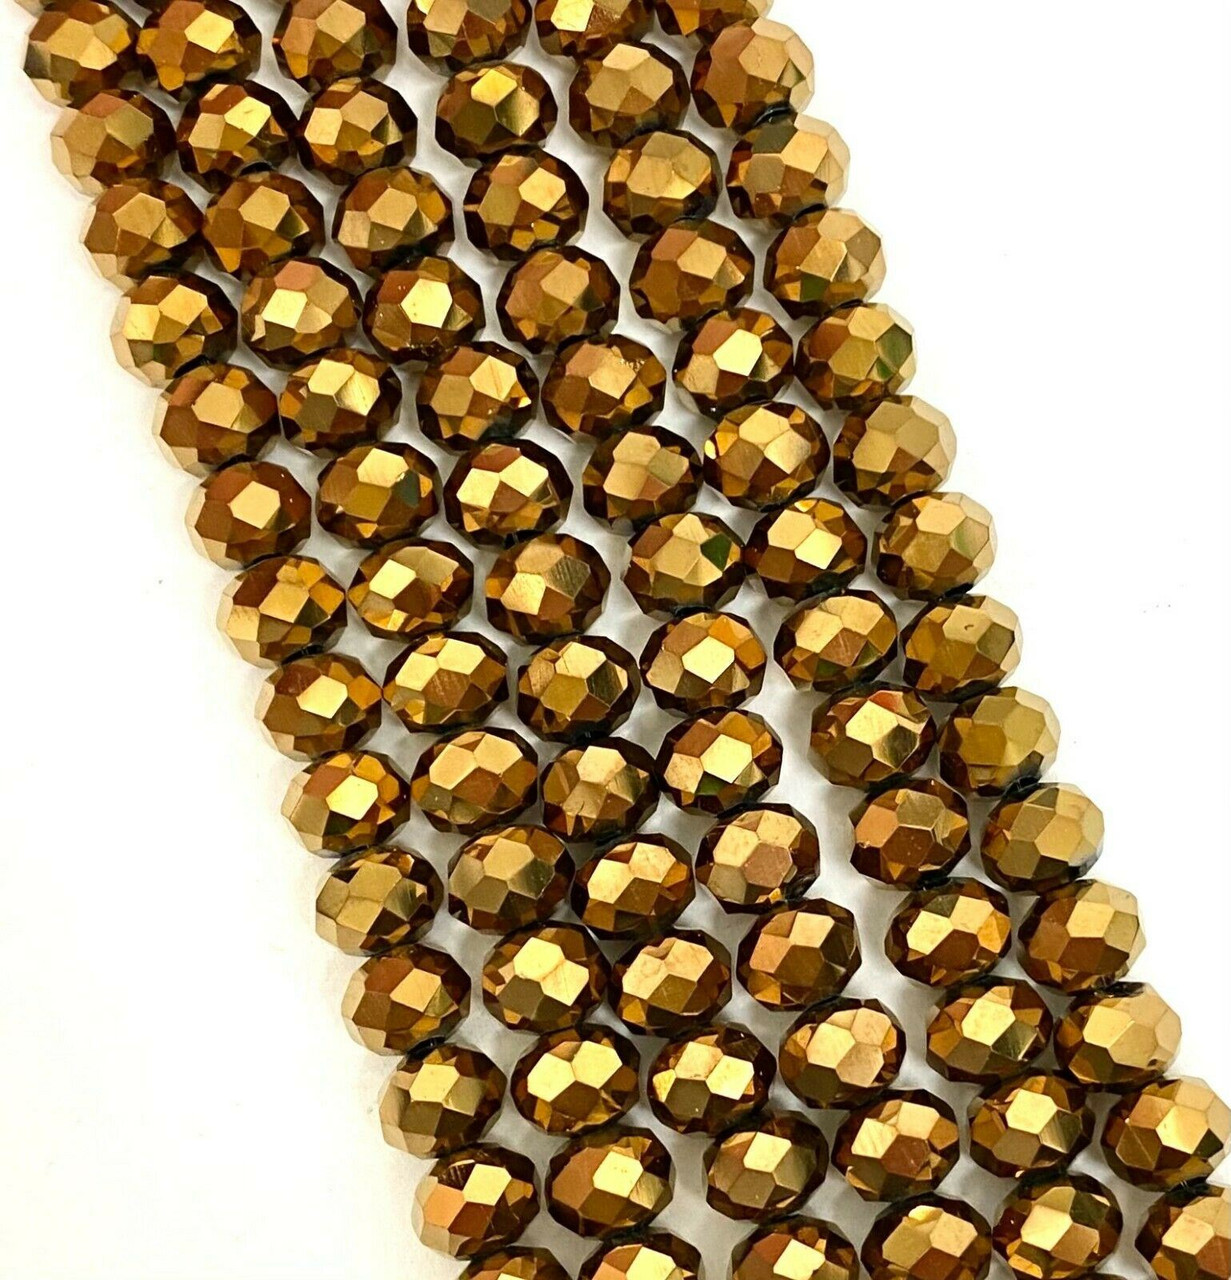 3x2mm Faceted Glass Rondelle beads - BRONZE METALLIC - approx 16" strand (approx 200 beads)